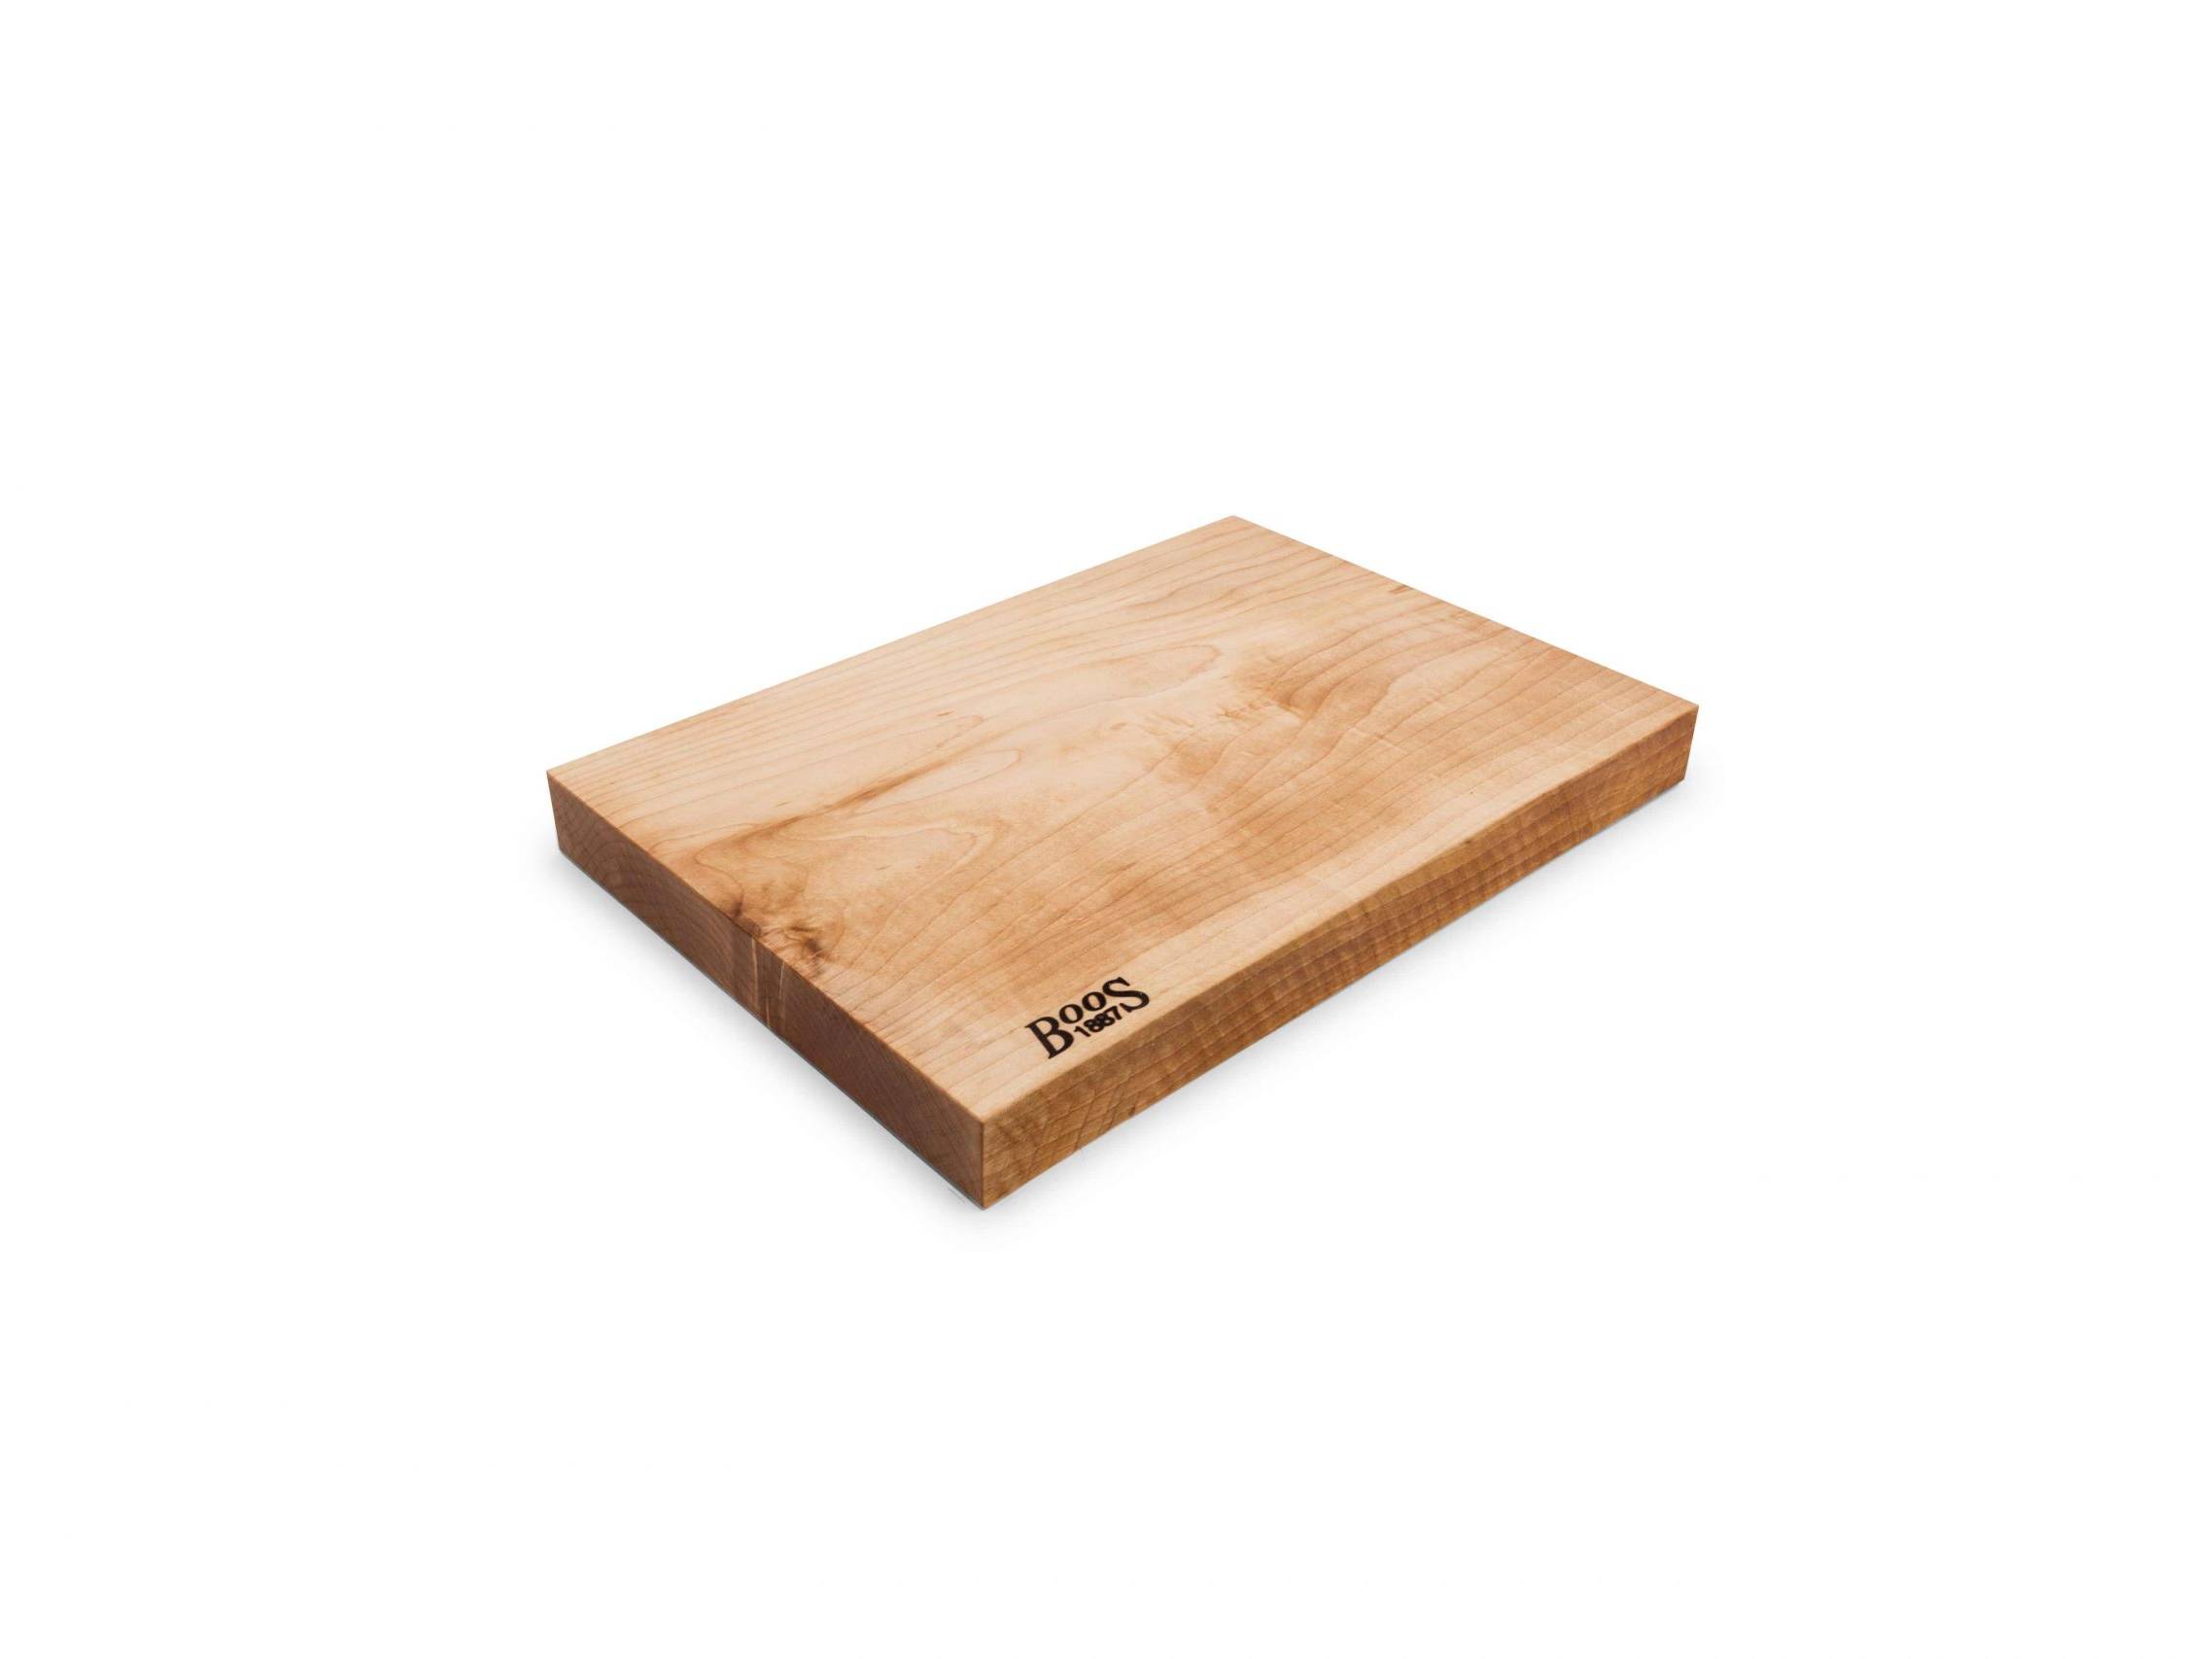 Boos 1887 / Rustic Edge one piece cutting board; hard maple; can be used on both sides 1